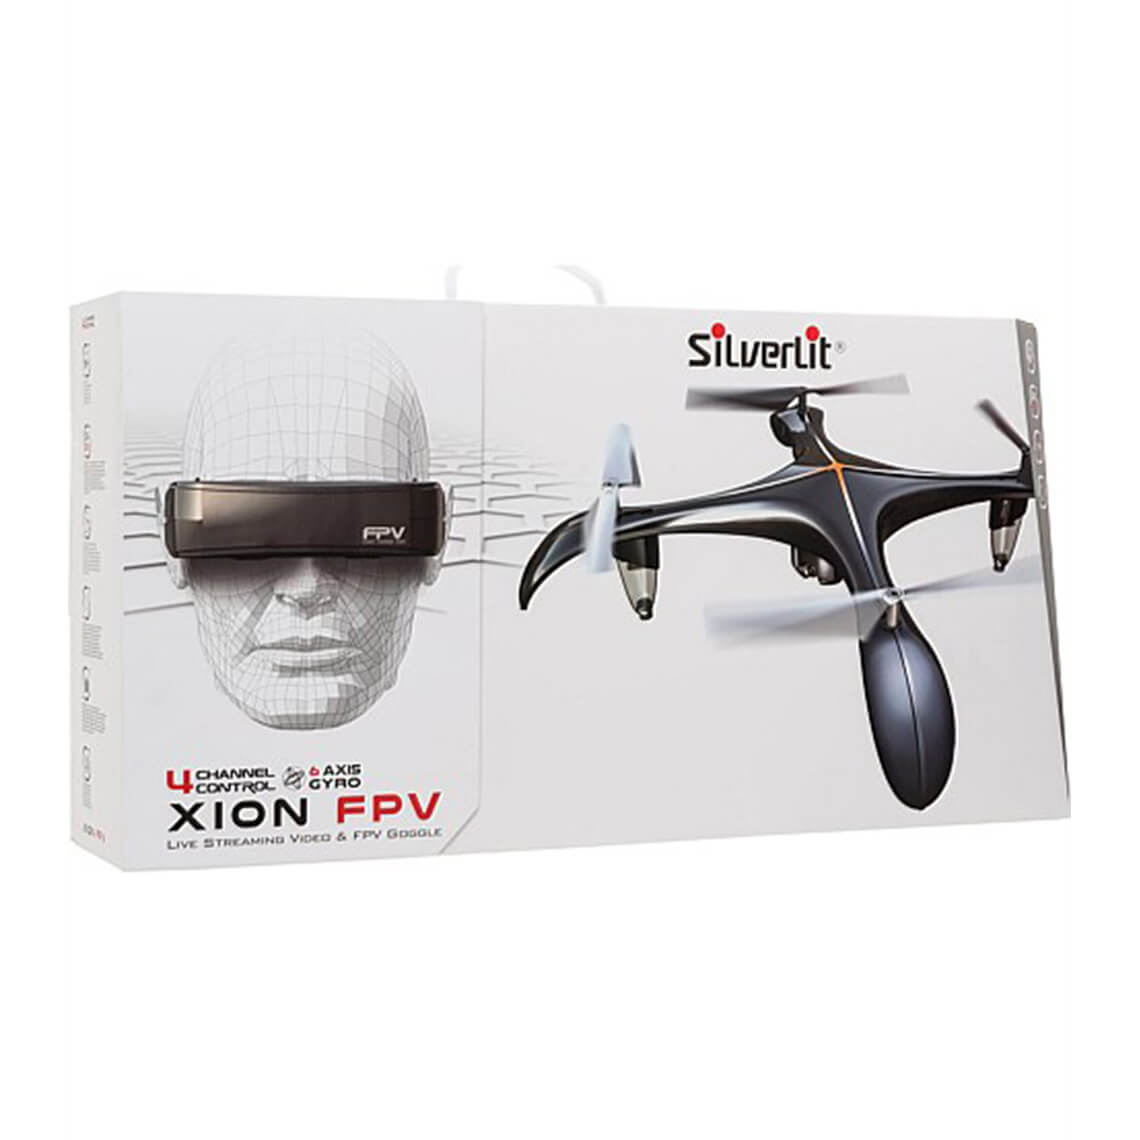 FPV (Discontinued) – Silverlit